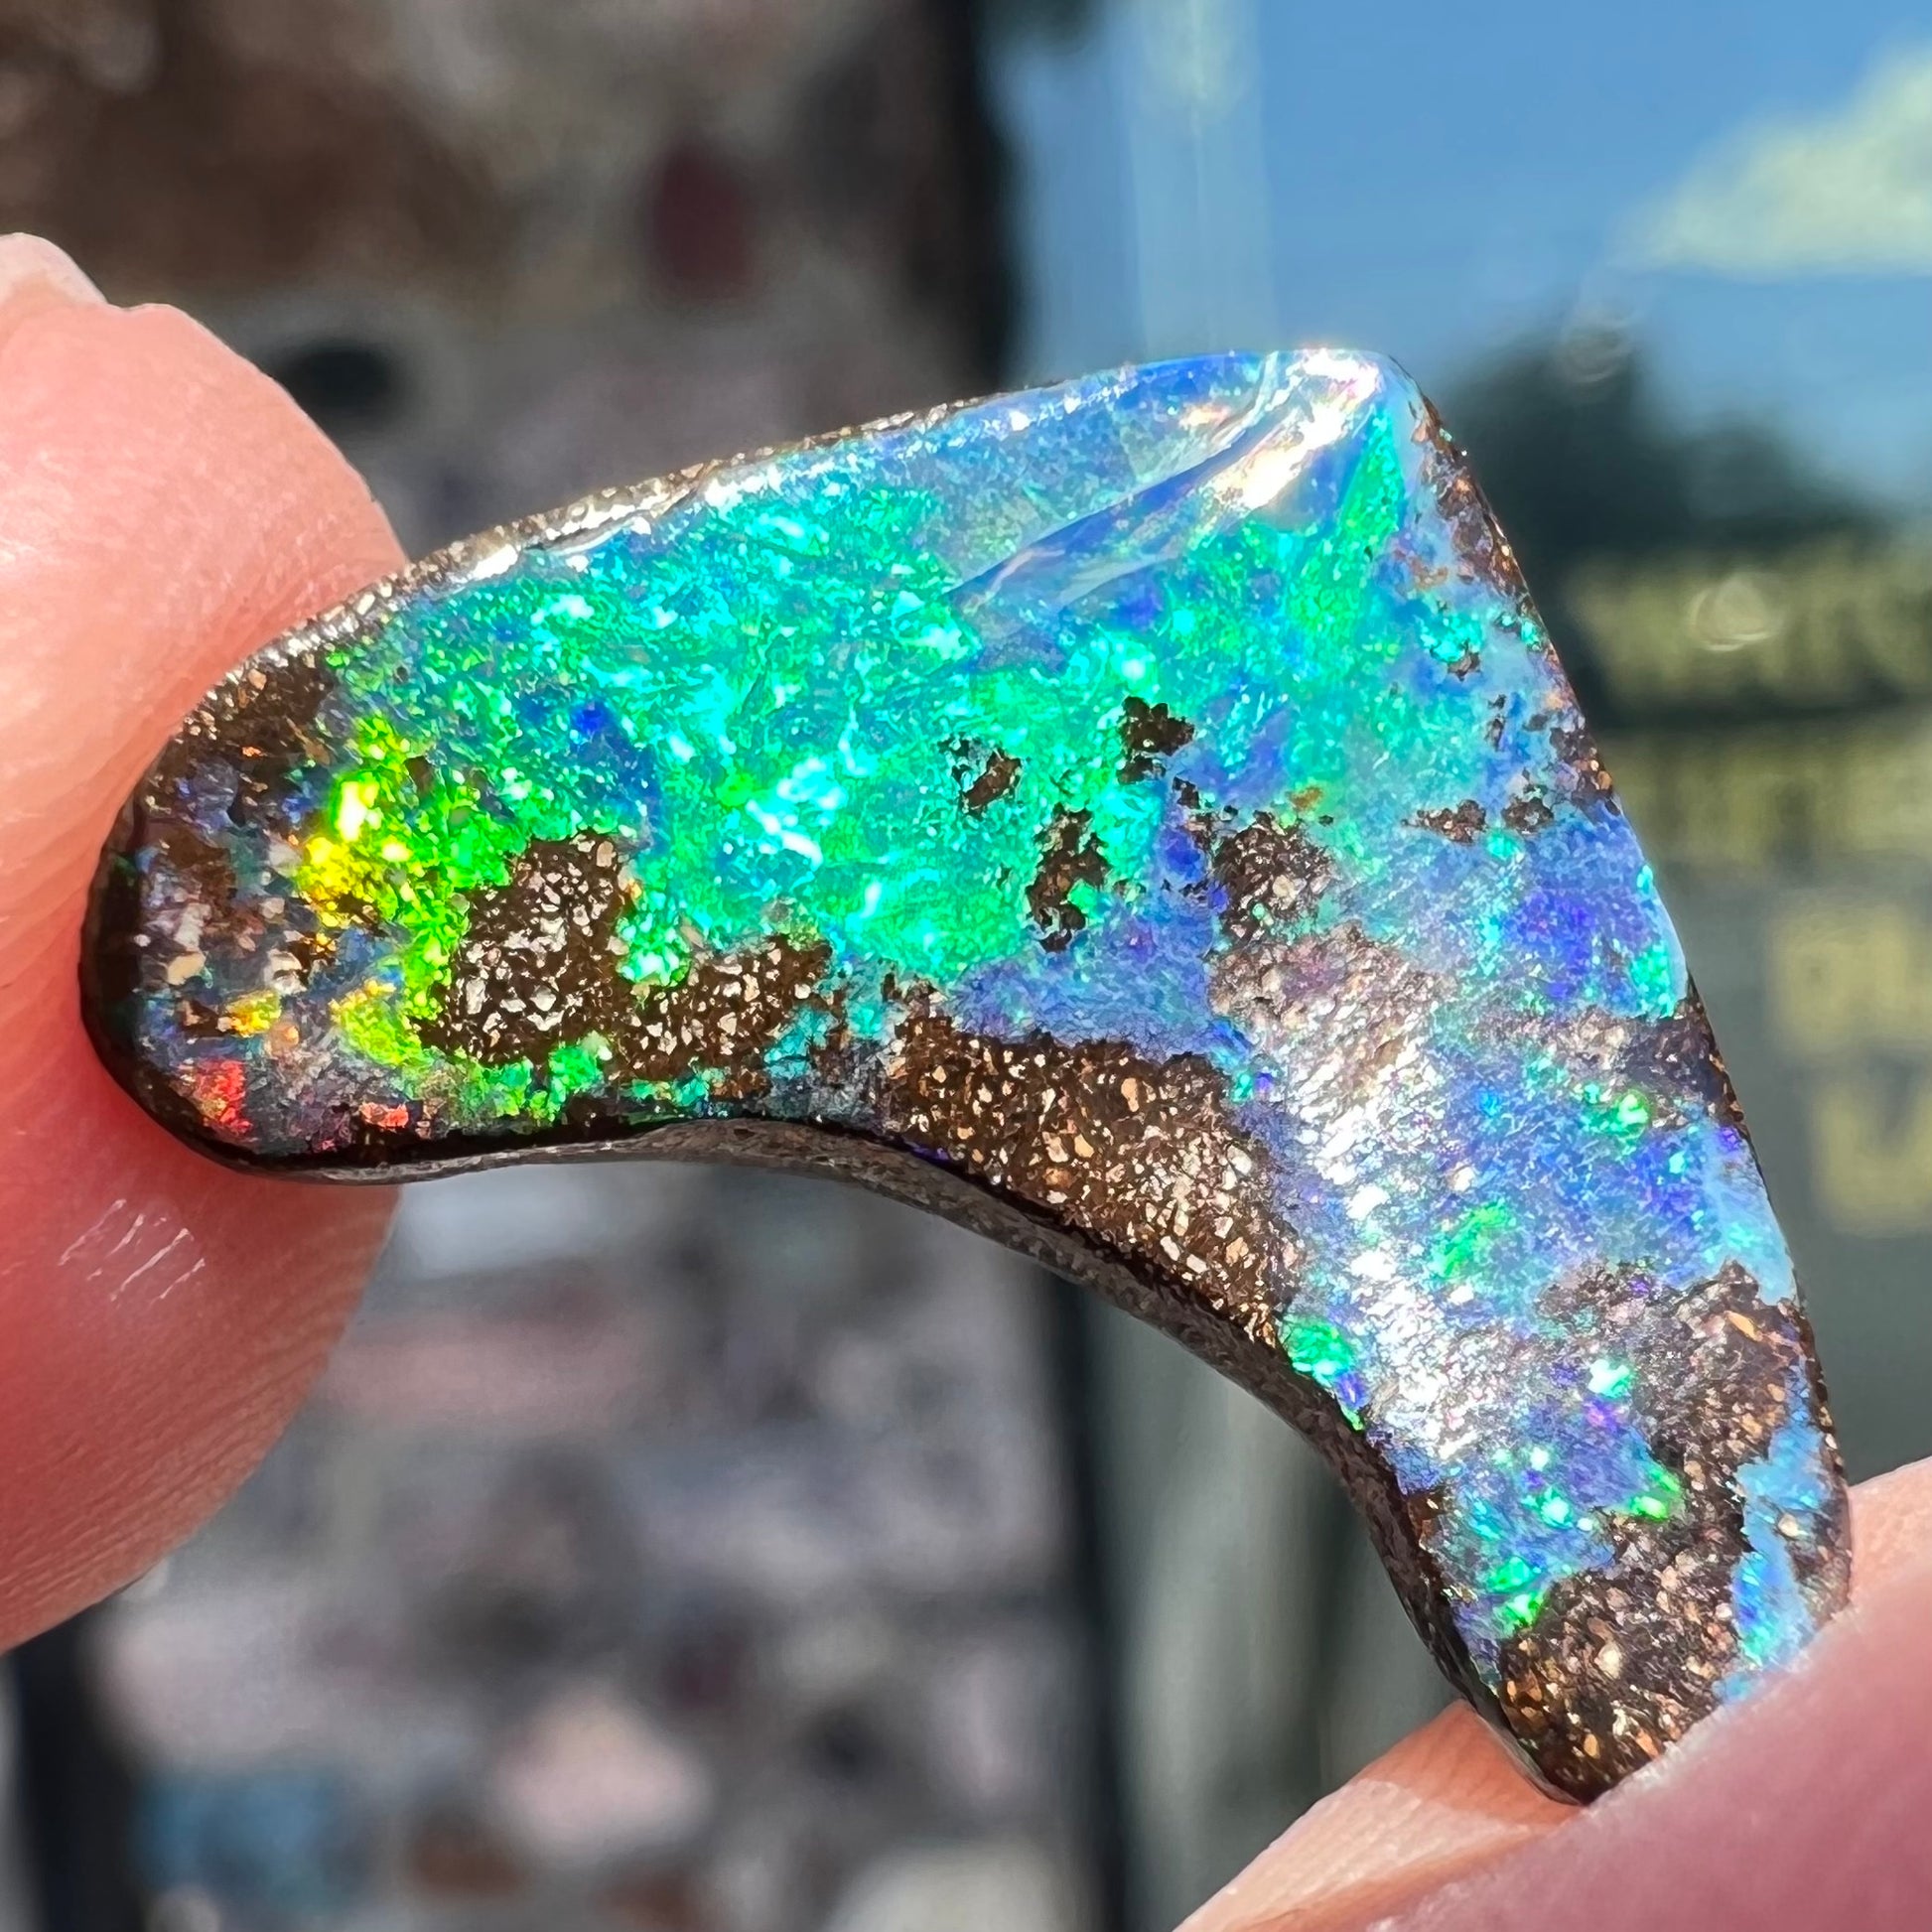 A loose, polished, boomerang shaped boulder opal stone from Queensland, Australia.